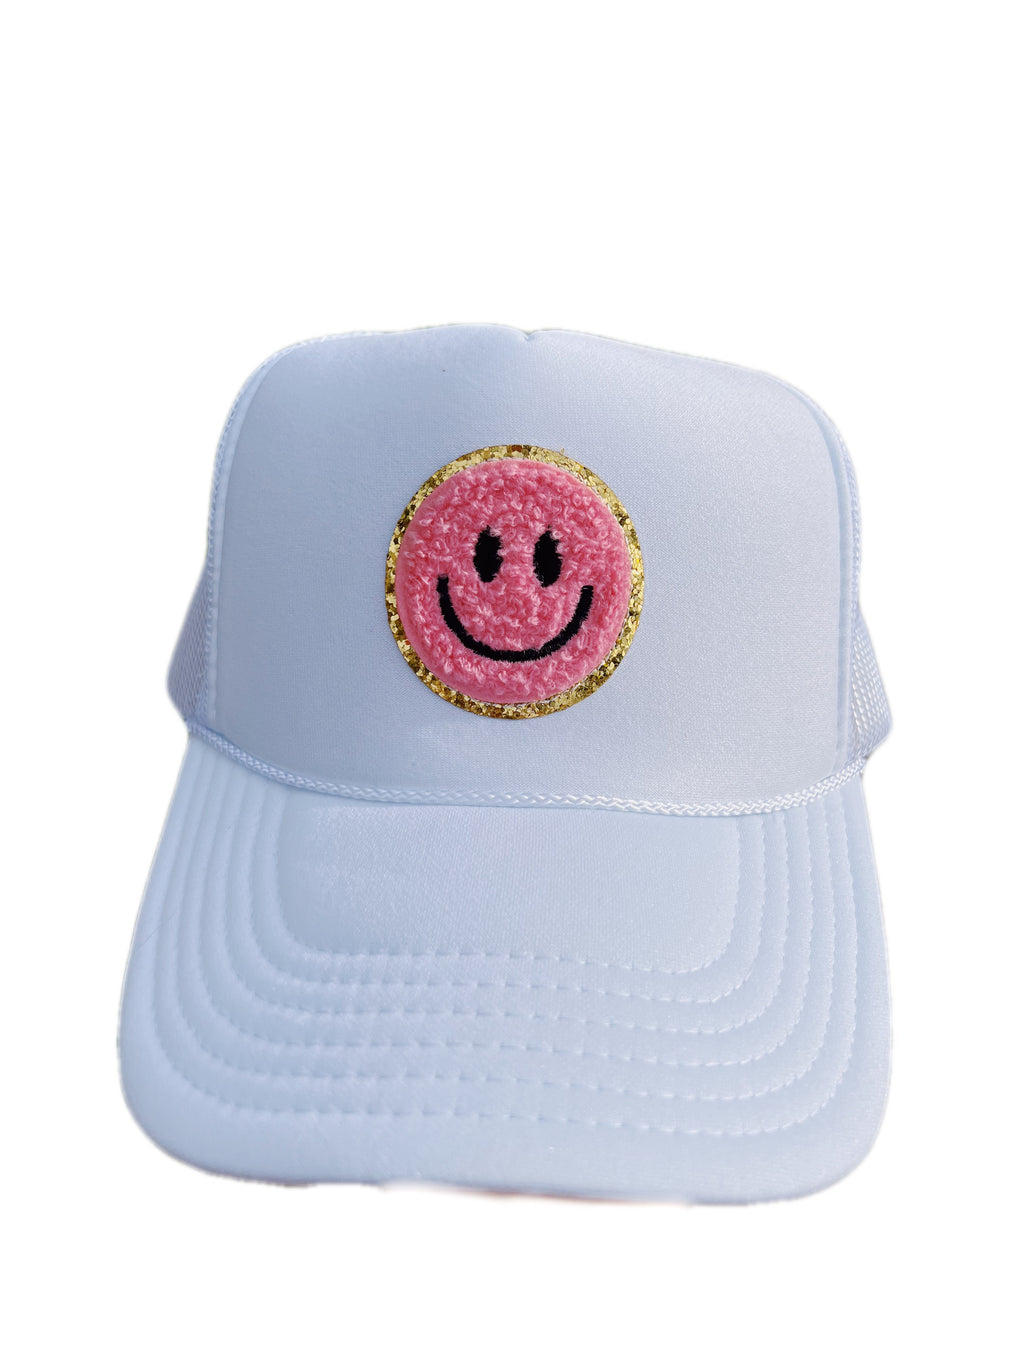 WHITE TRUCKER HAT WITH SMALL LIGHT PINK SMILEY FACE